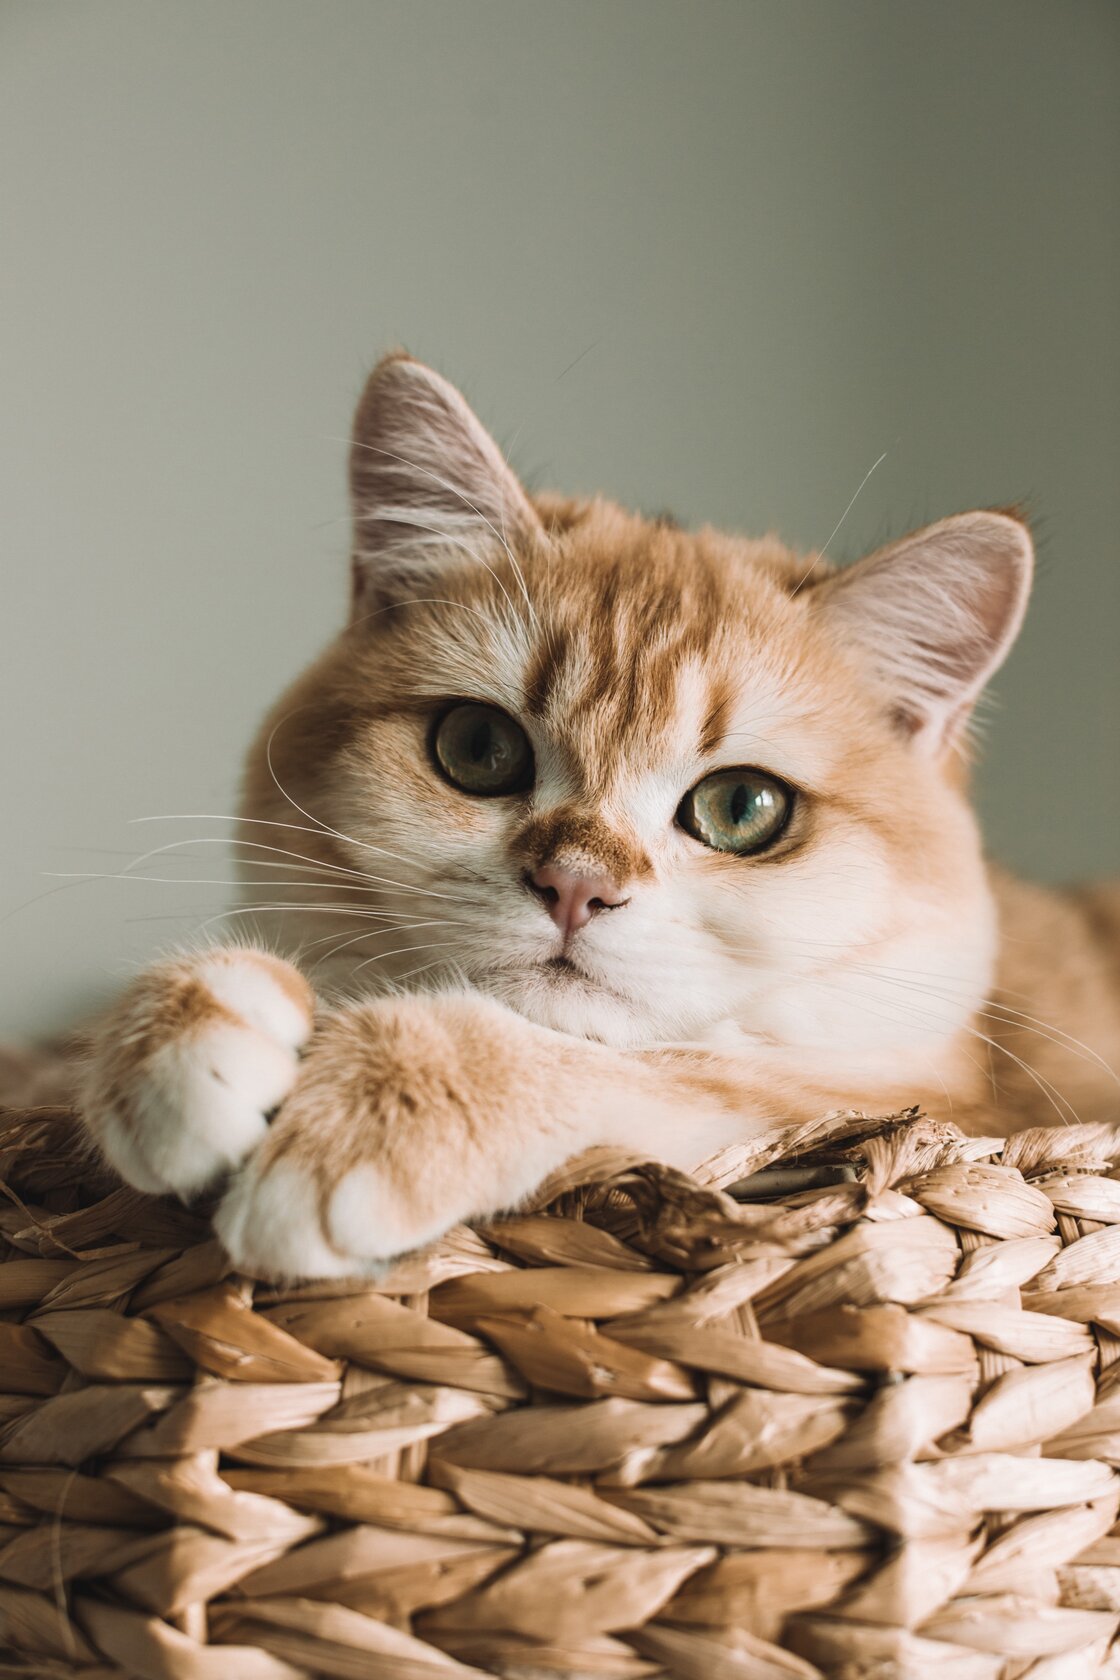 Fat and its role in the diet of cats